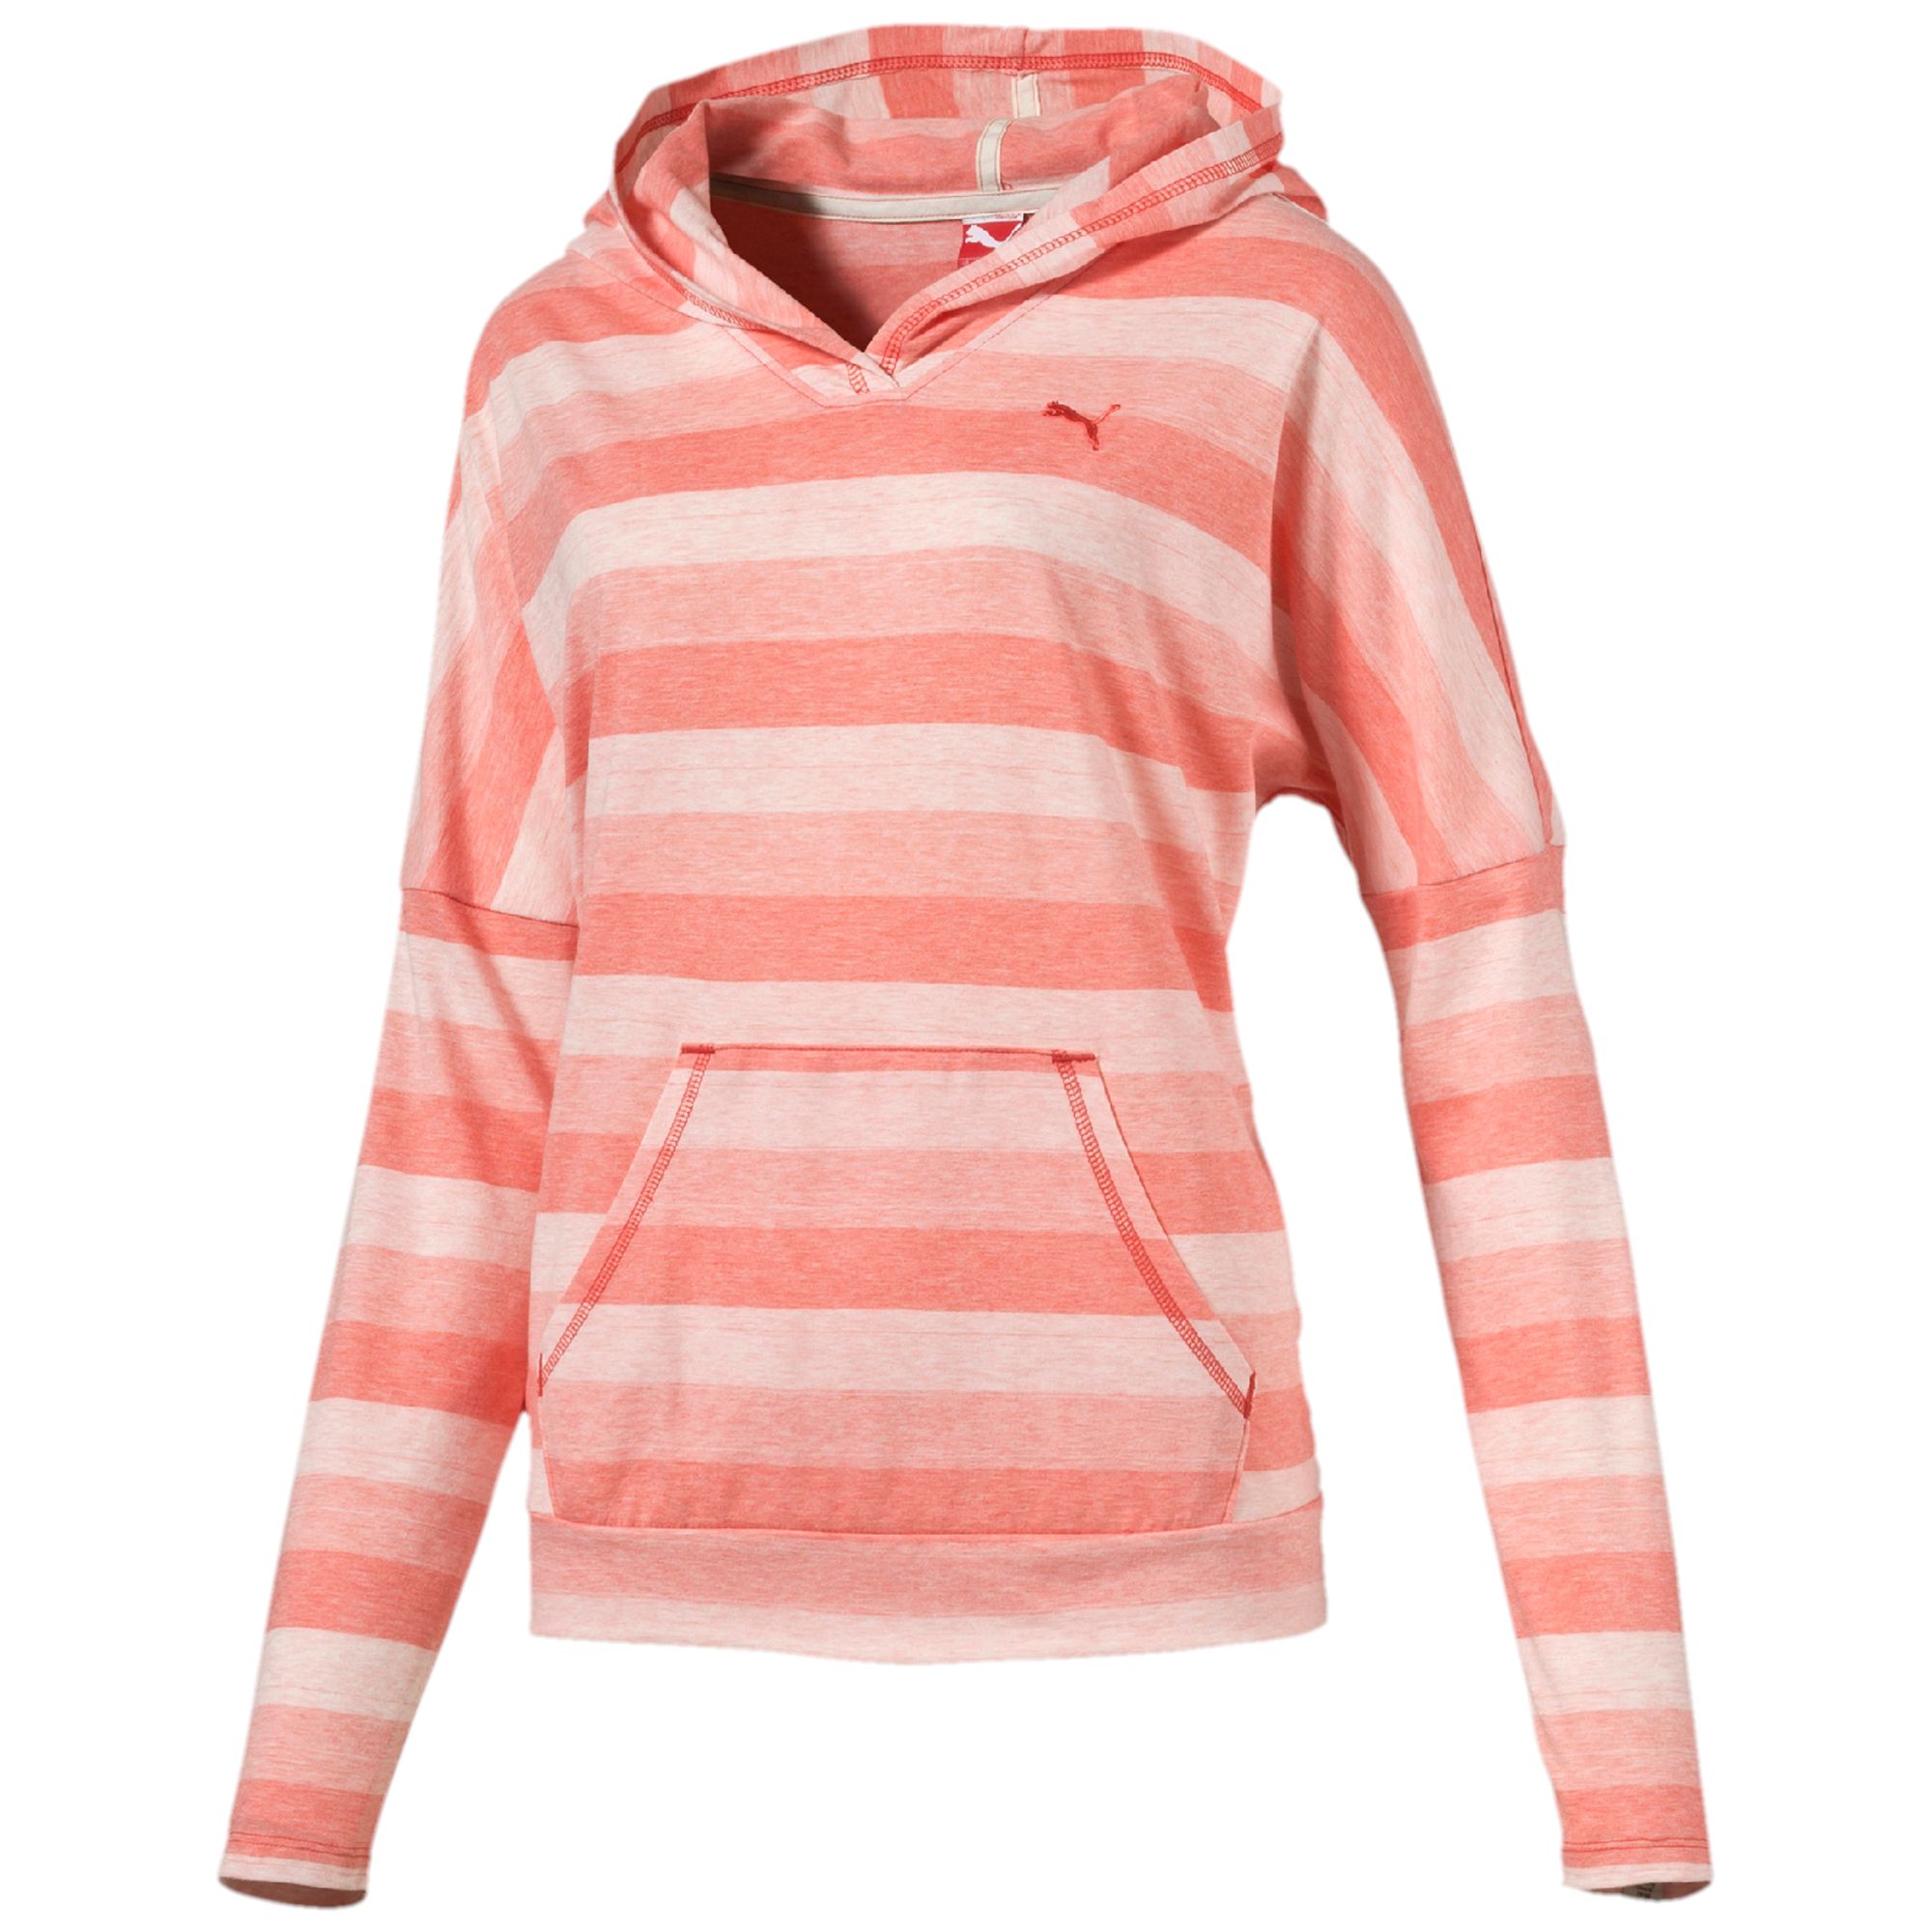  STYLE Personal Best Hooded Cover up W - Puma  <br> STYLE Personal Best Hooded Cover up W<br>  STYLE Personal Best Hooded Cover up W    <b style="color:black;background-color:#66ffff"></b>     ,      .                .     Puma Cat.<br> <br>: - 2015 <br>: 60% , 40% <br>        <br>     <br> -    <br><br><br>size US: XL<br>gender: None